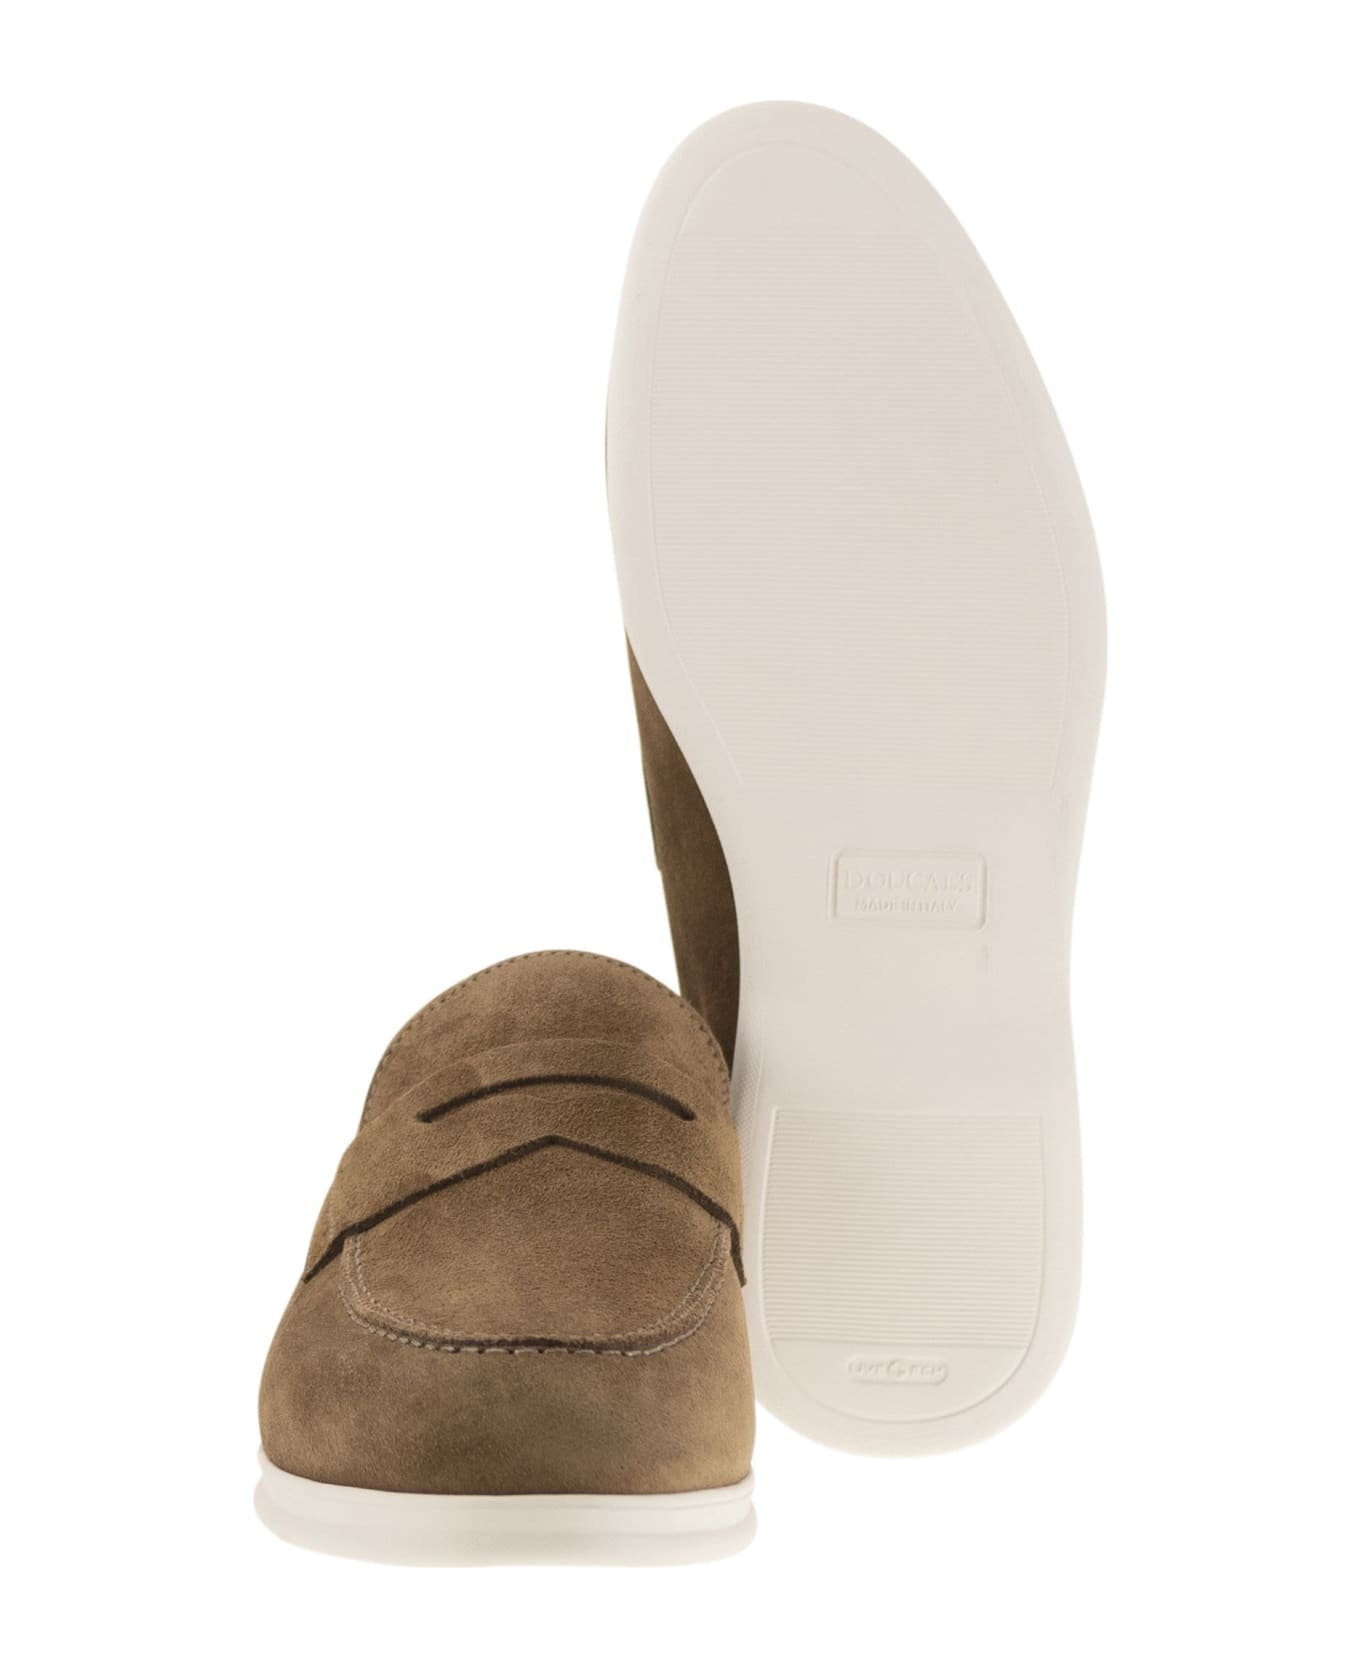 Doucal's Penny - Suede Moccasin - Beige